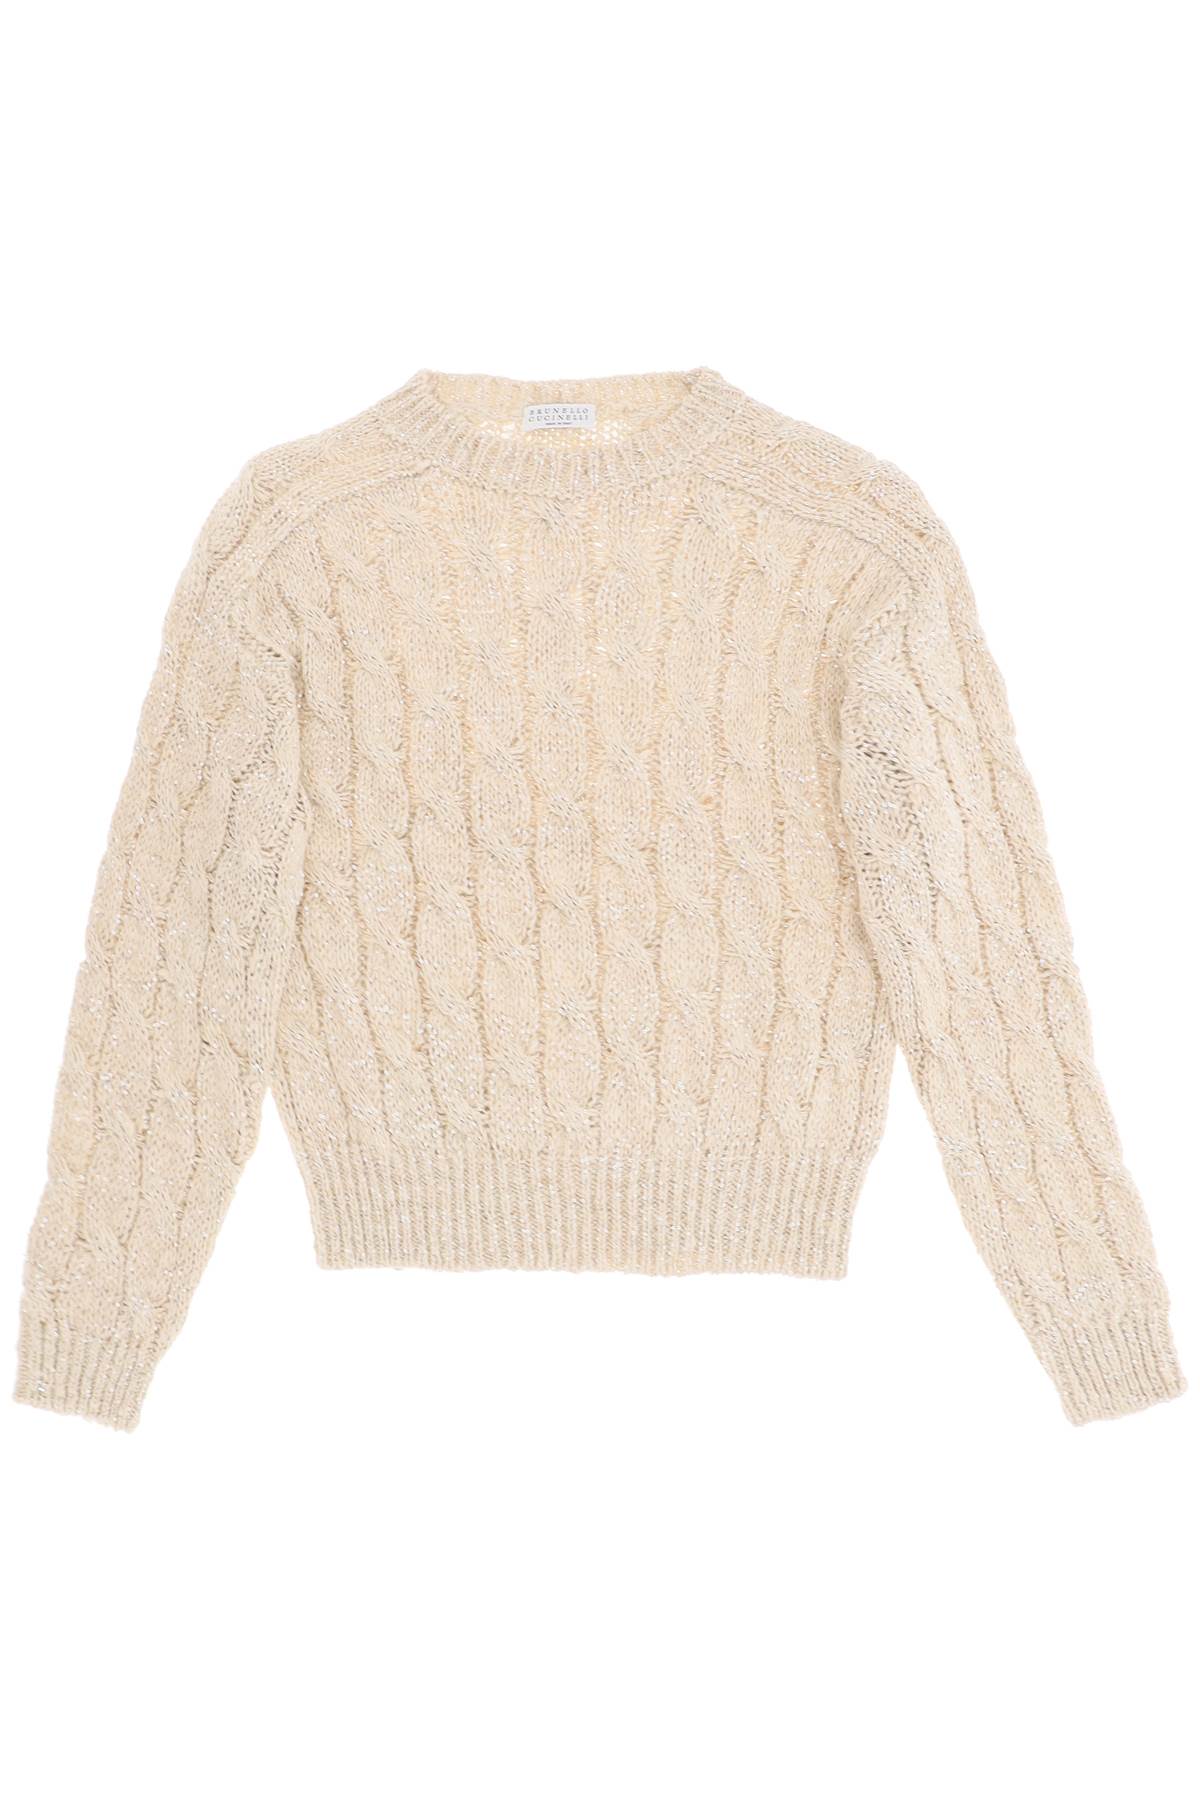 BRUNELLO CUCINELLI SWEATER IN CABLE KNIT WITH SEQUINS